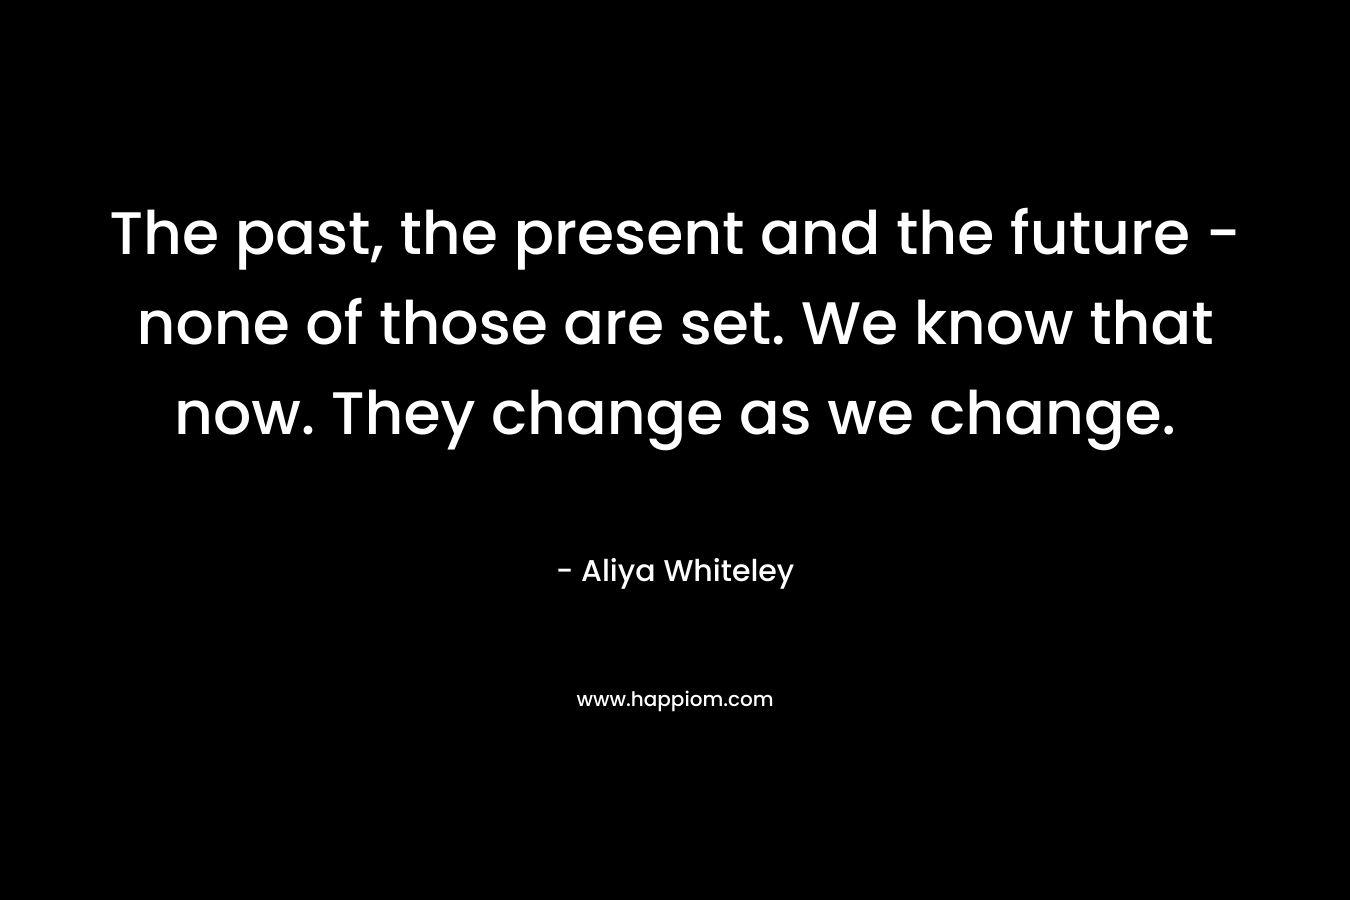 The past, the present and the future - none of those are set. We know that now. They change as we change.